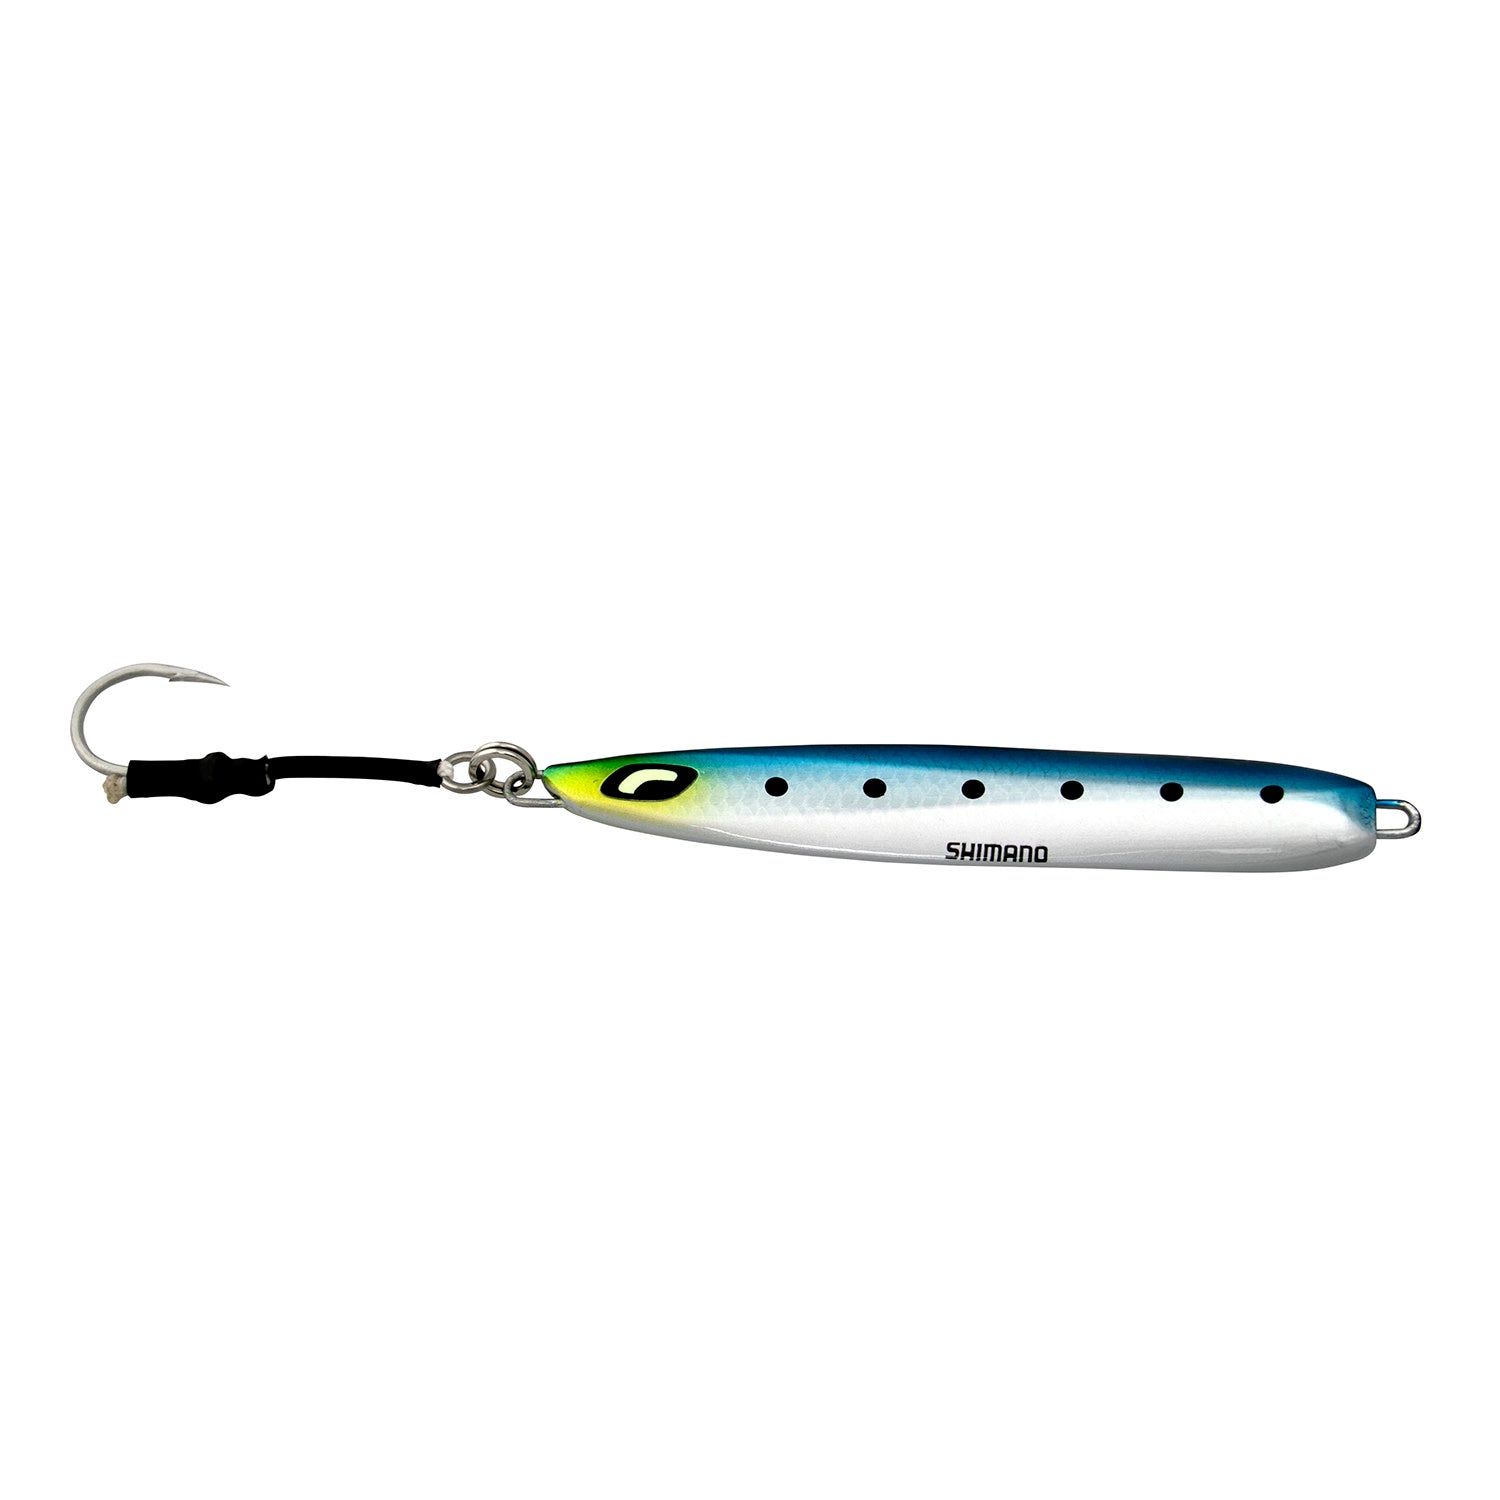 Buy Shimano Butterfly Wing Fall Slow Pitch Jig 160g online at